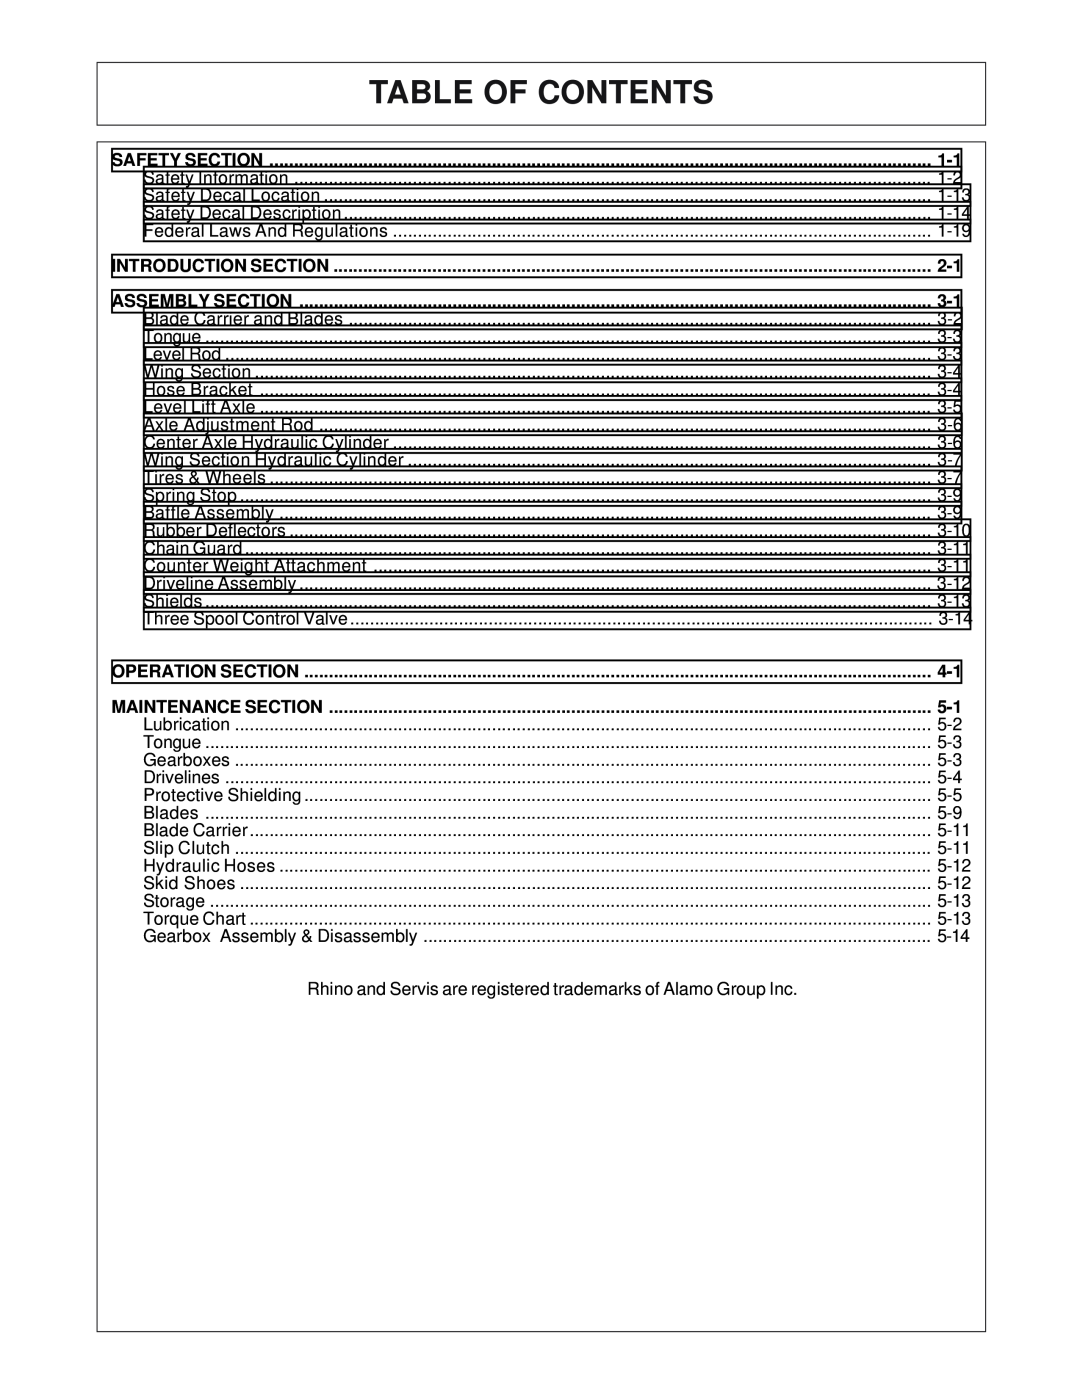 Alamo SR14, SR20 manual Table Of Contents, Safety Section, Introduction Section, Assembly Section, Operation Section 